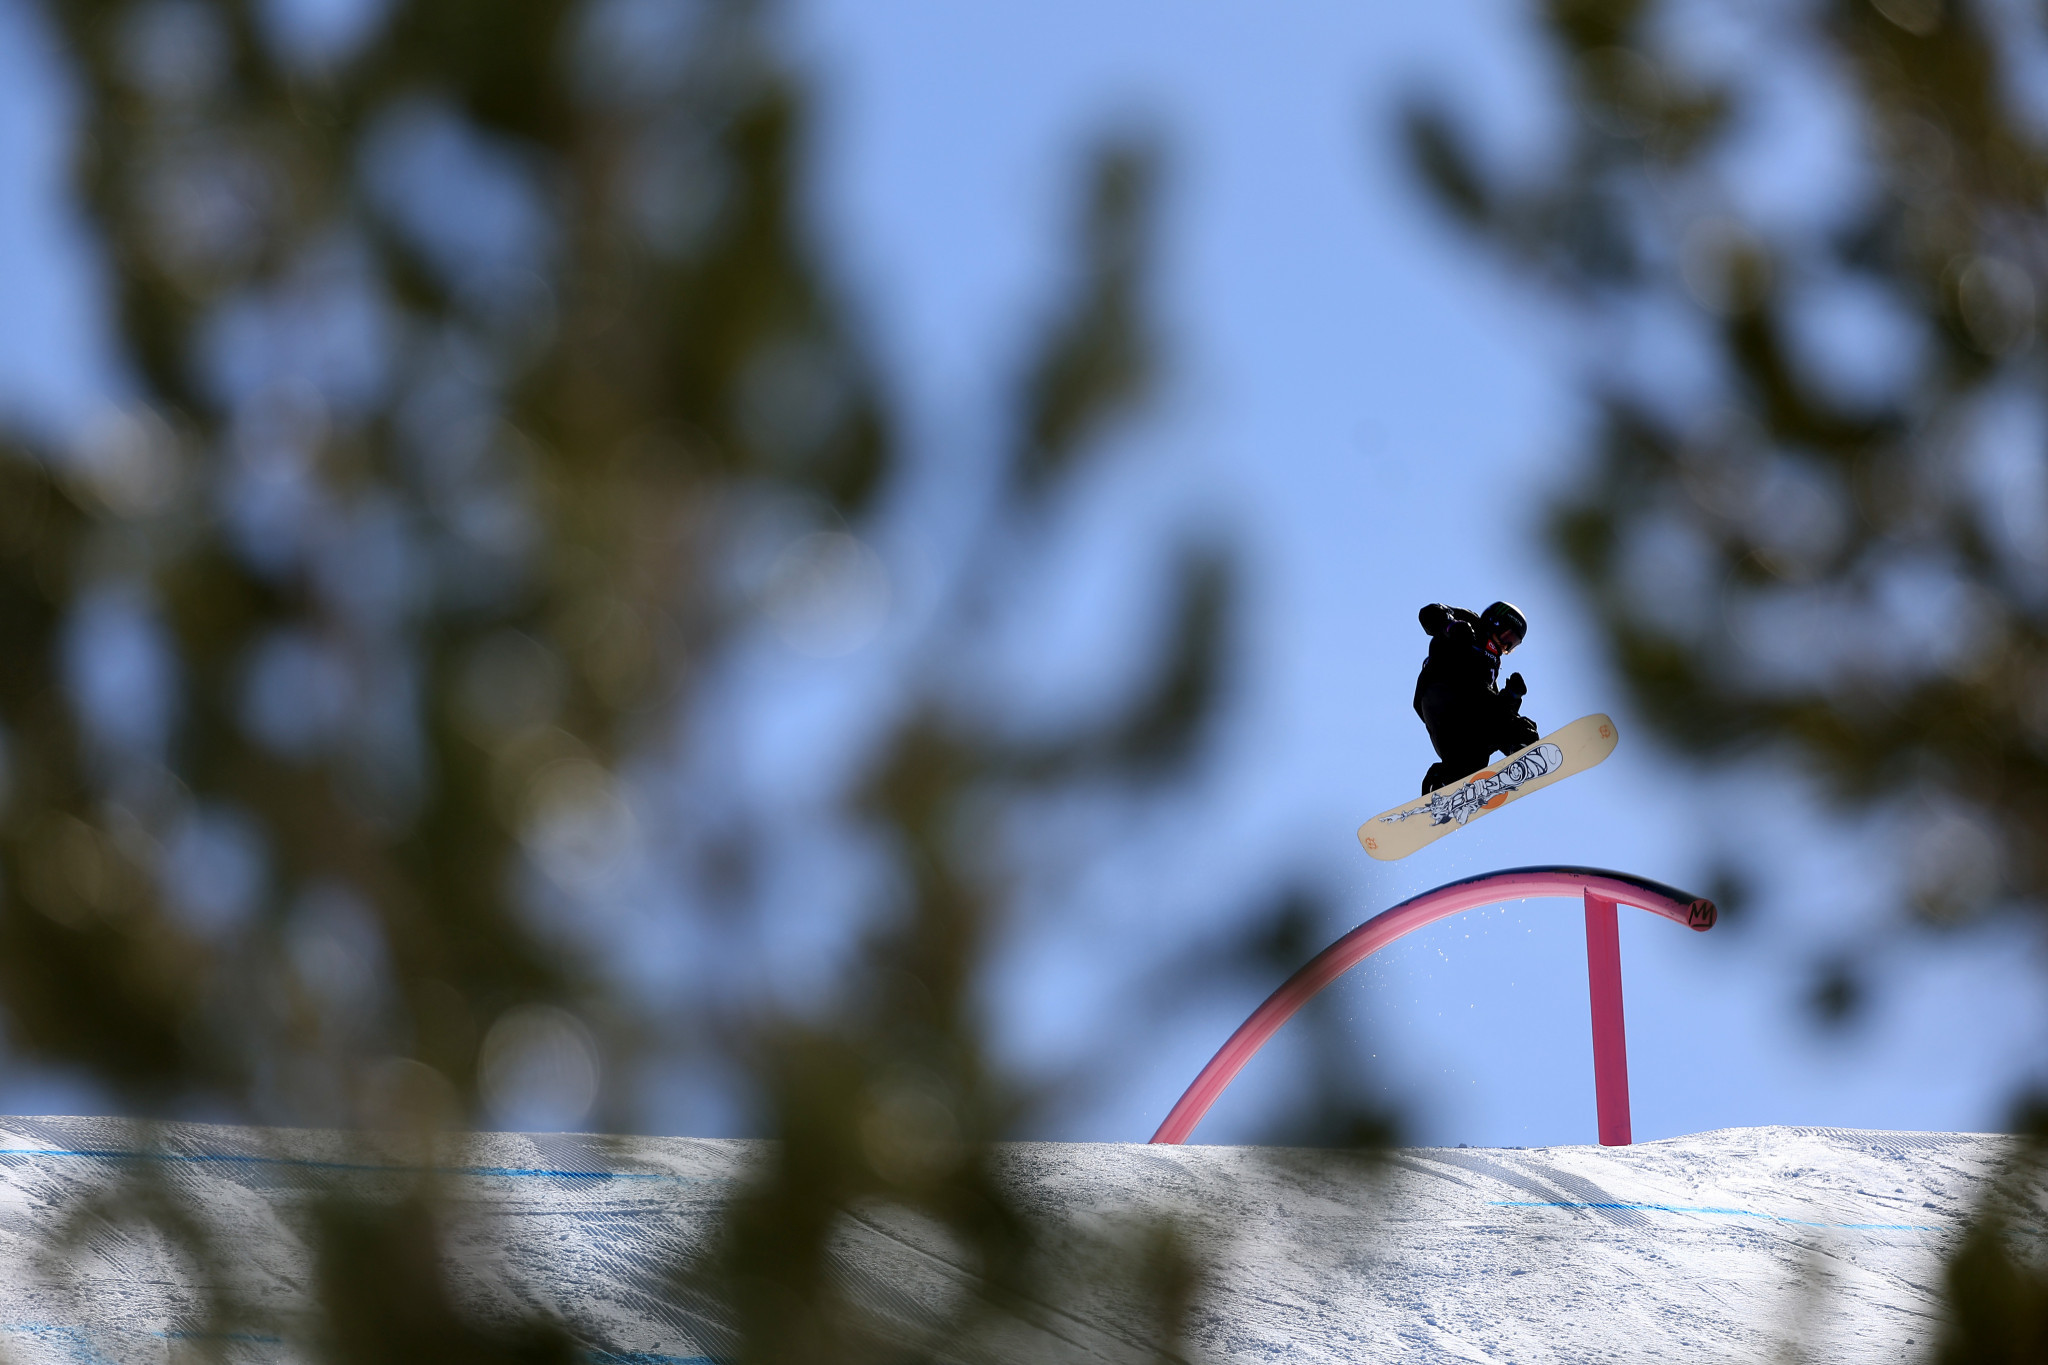 Hasegawa earns first Snowboard Slopestyle World Cup win as Guseli takes Park and Pipe Crystal Globe